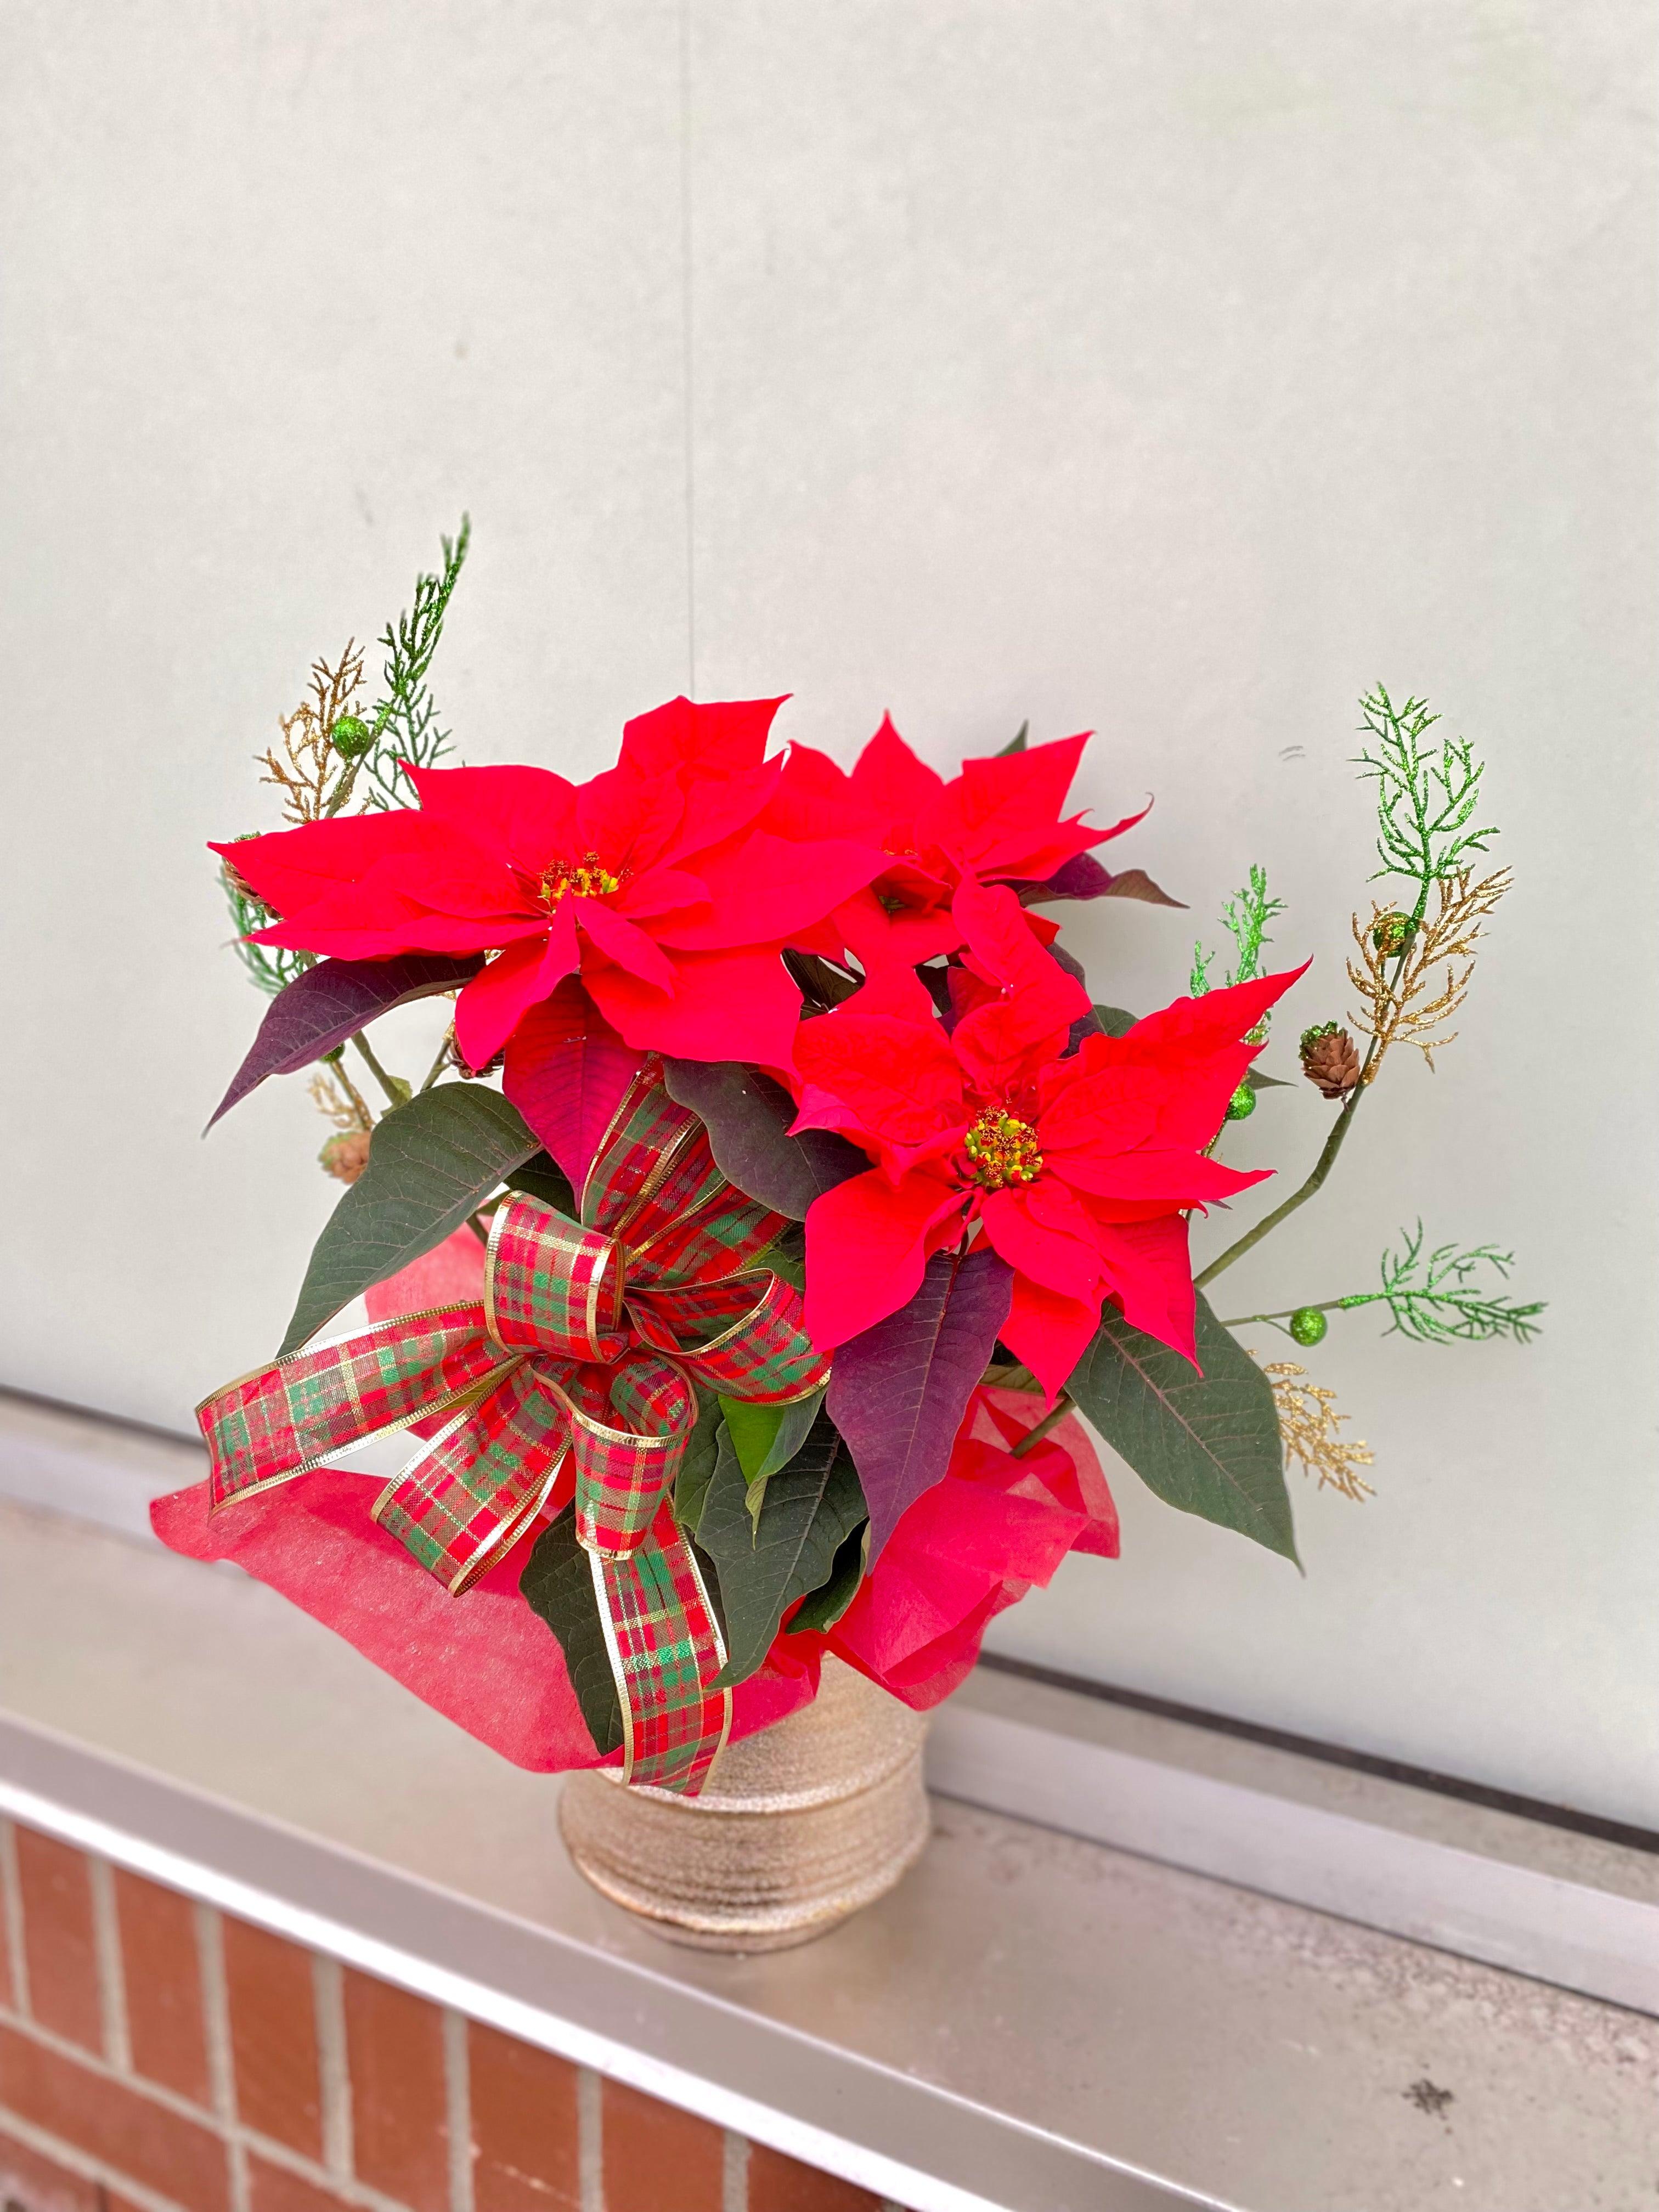 Potted Poinsettia - Four Seasons Floristry